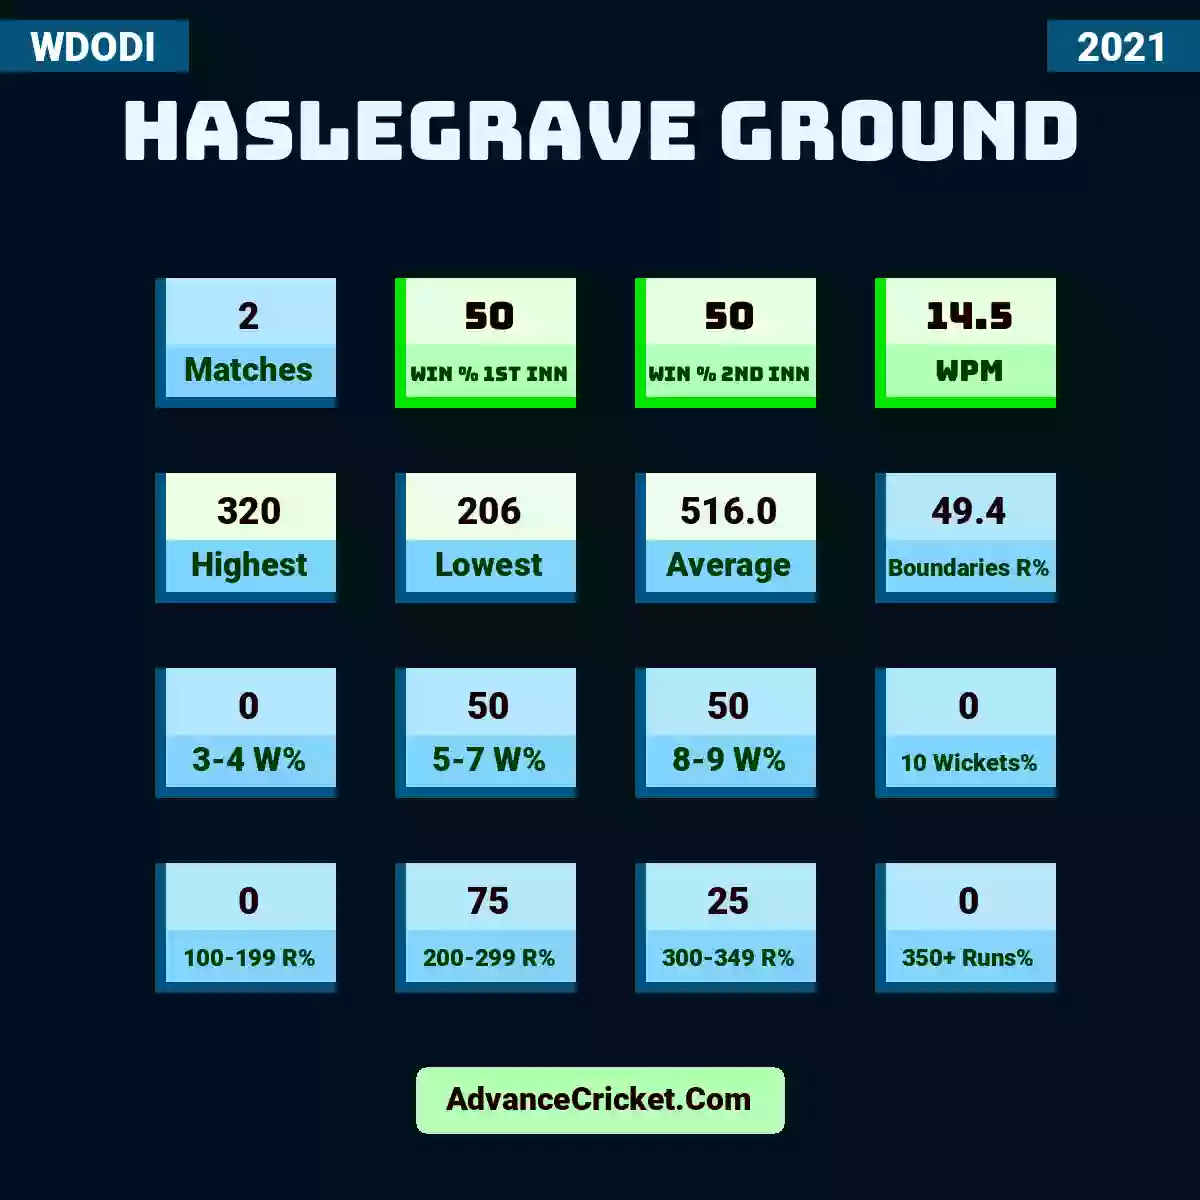 Image showing Haslegrave Ground with Matches: 2, Win % 1st Inn: 50, Win % 2nd Inn: 50, WPM: 14.5, Highest: 320, Lowest: 206, Average: 516.0, Boundaries R%: 49.4, 3-4 W%: 0, 5-7 W%: 50, 8-9 W%: 50, 10 Wickets%: 0, 100-199 R%: 0, 200-299 R%: 75, 300-349 R%: 25, 350+ Runs%: 0.